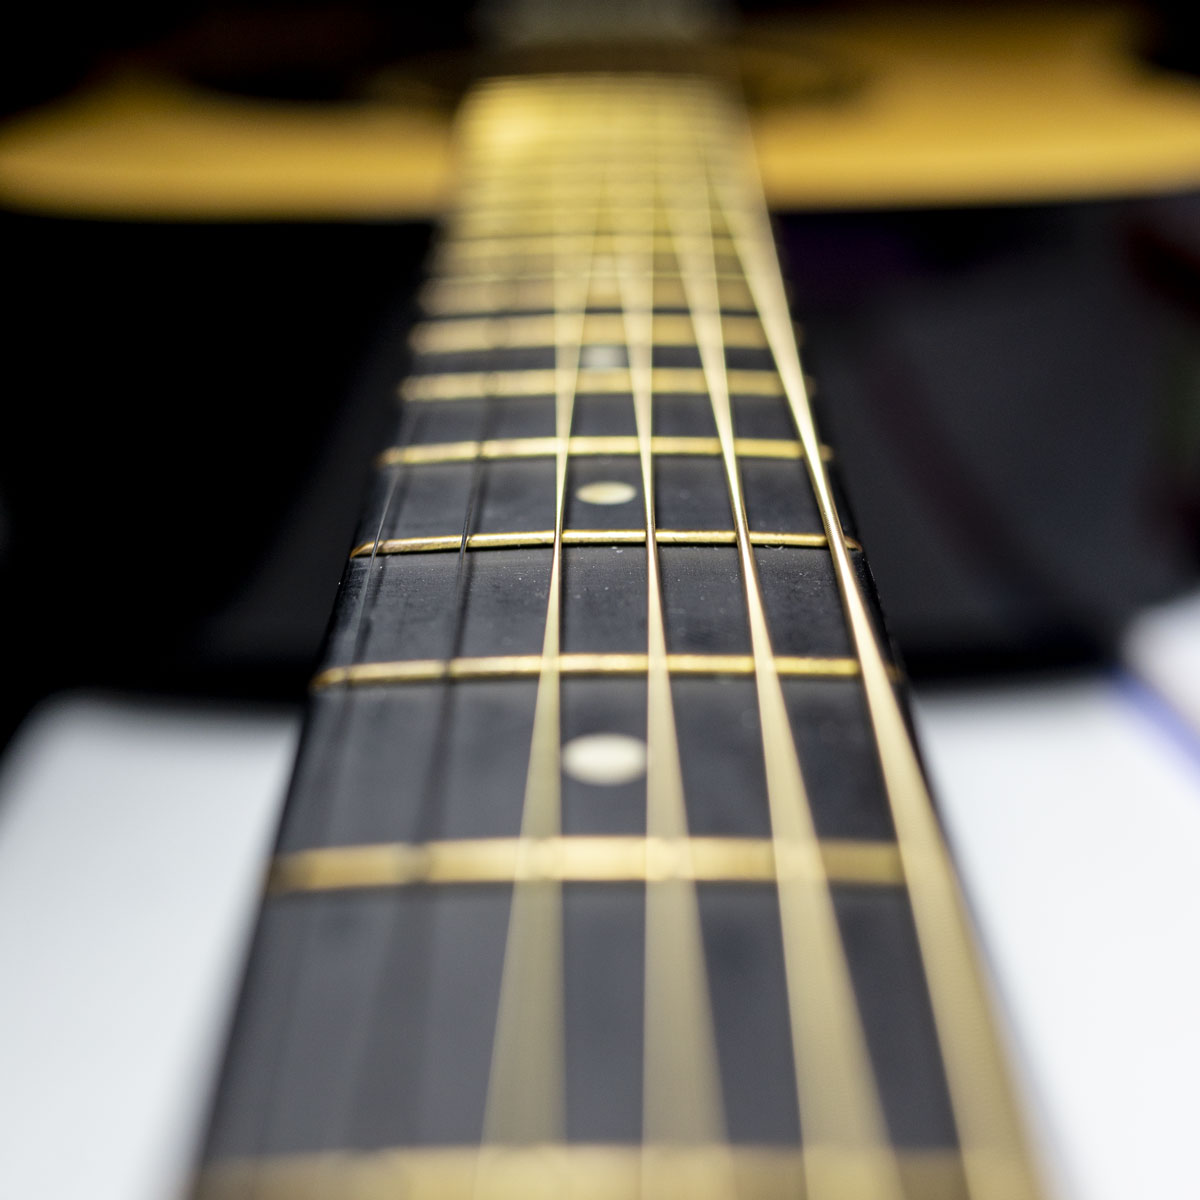 This image uses small aperture values to create shallow depth-of-field that blurs the guitar strings viewed down the fretboard. The point of focus stands out easily with the blurred surroundings.